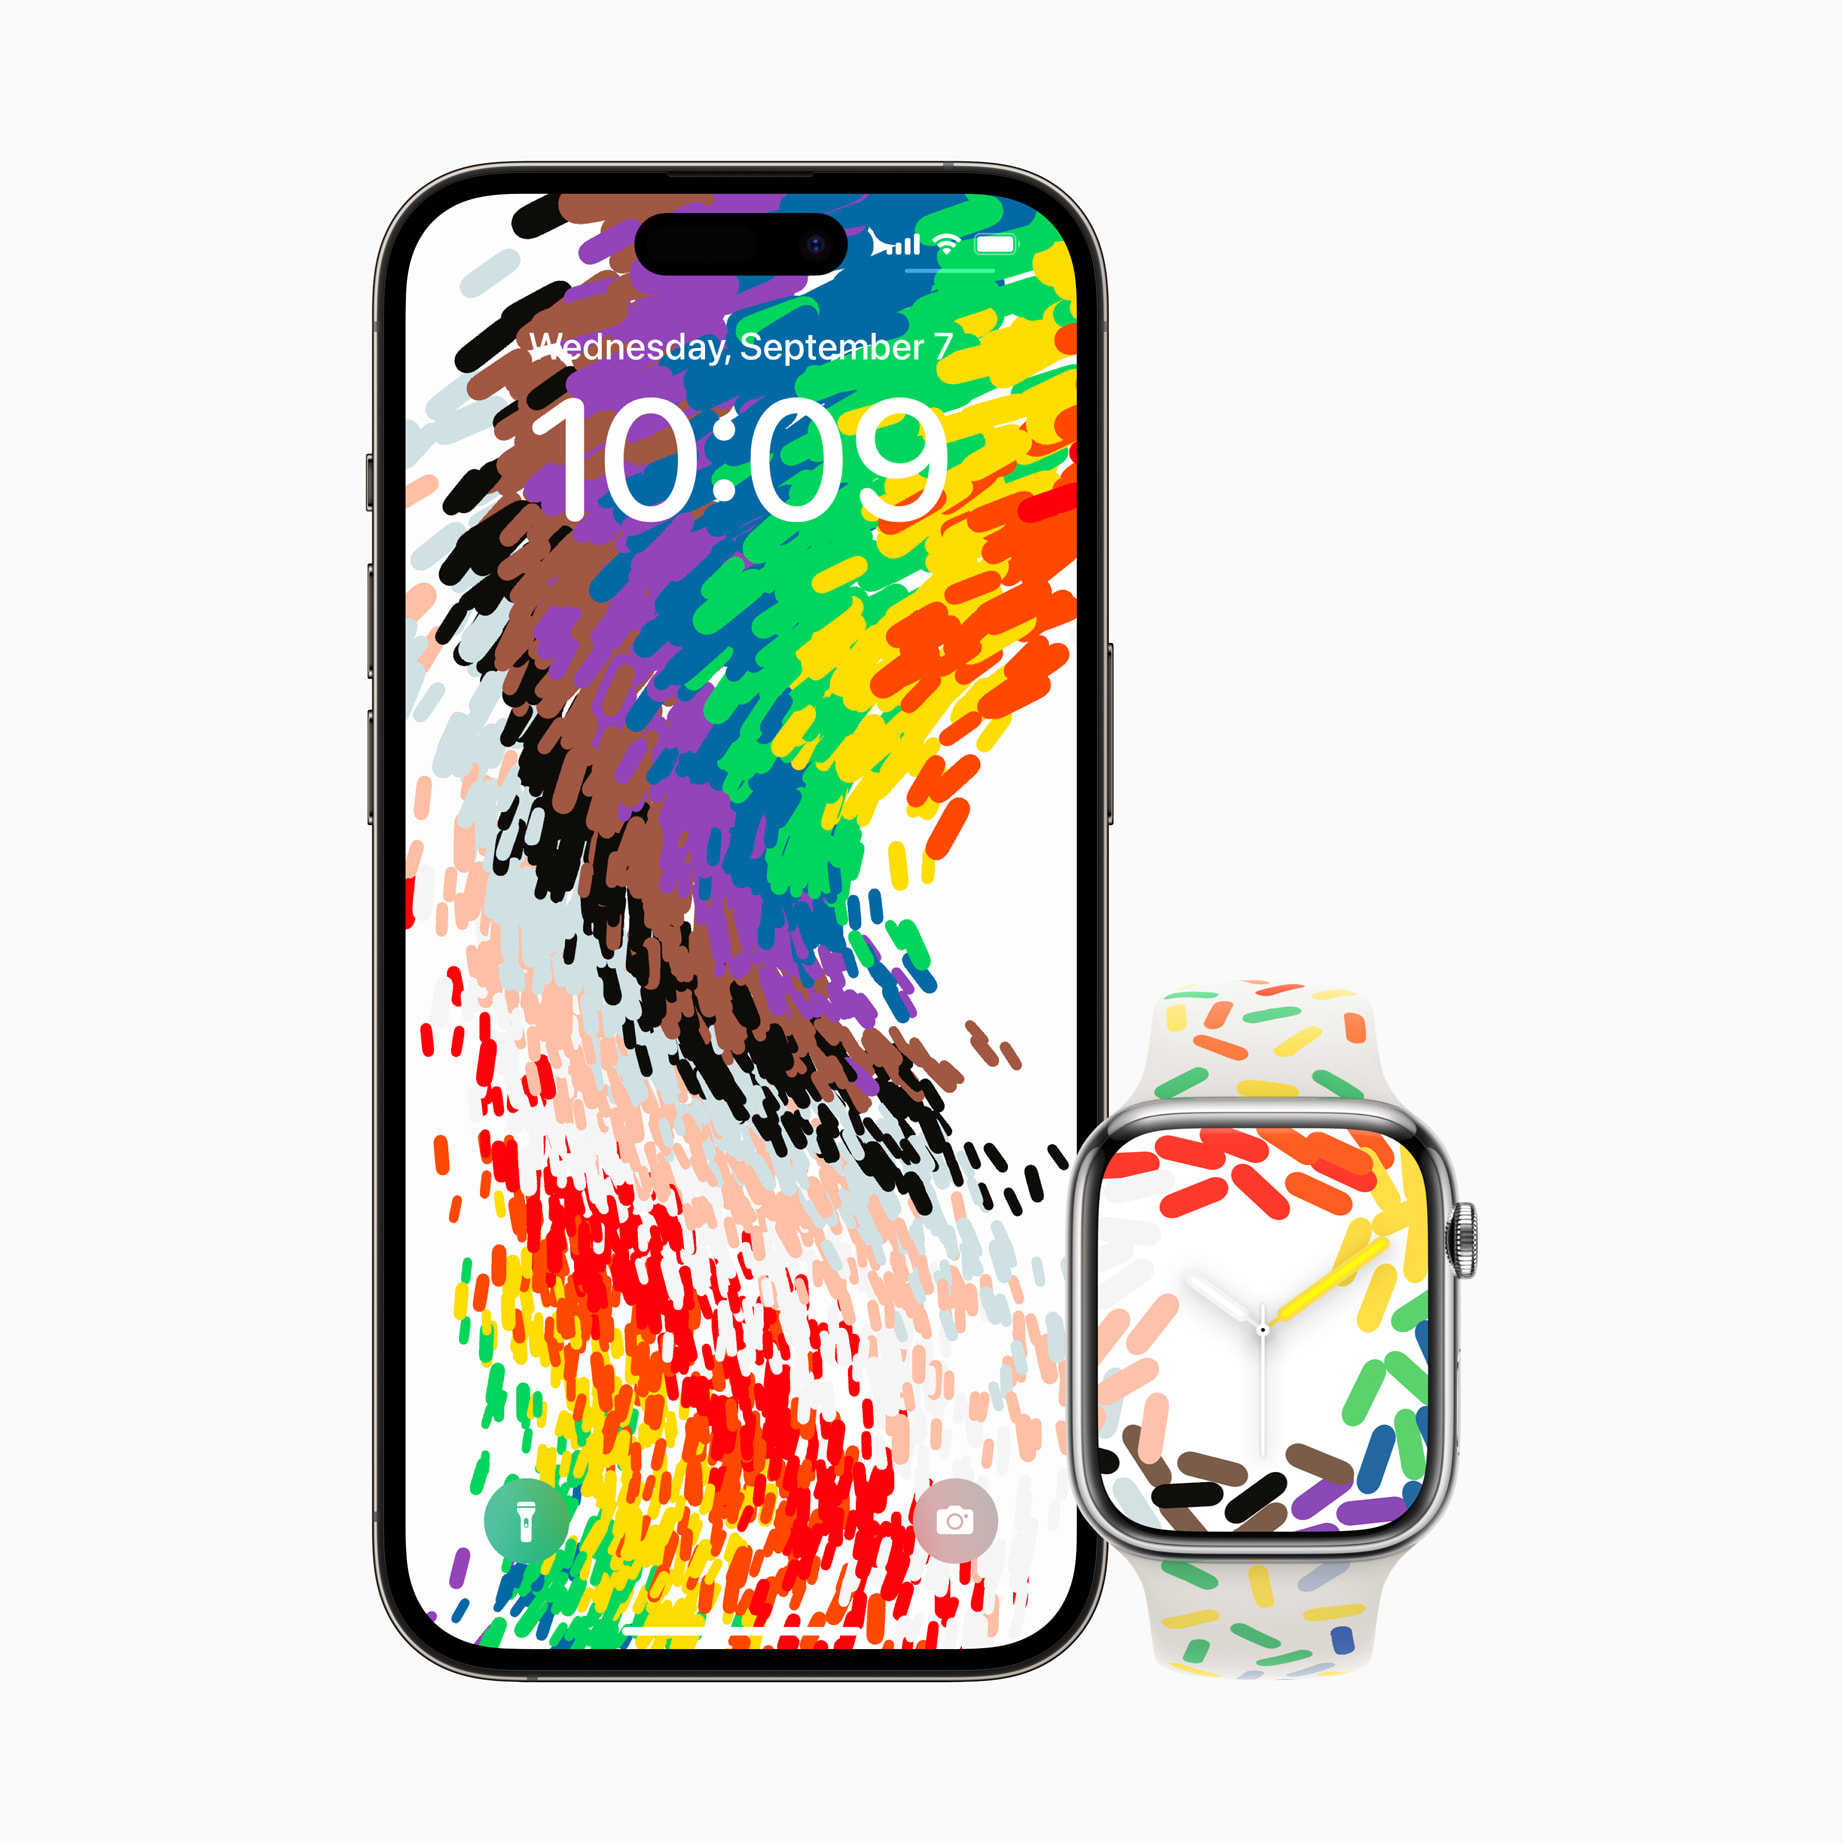 Download Apples New Pride Wallpaper for iPhone Here  iClarified